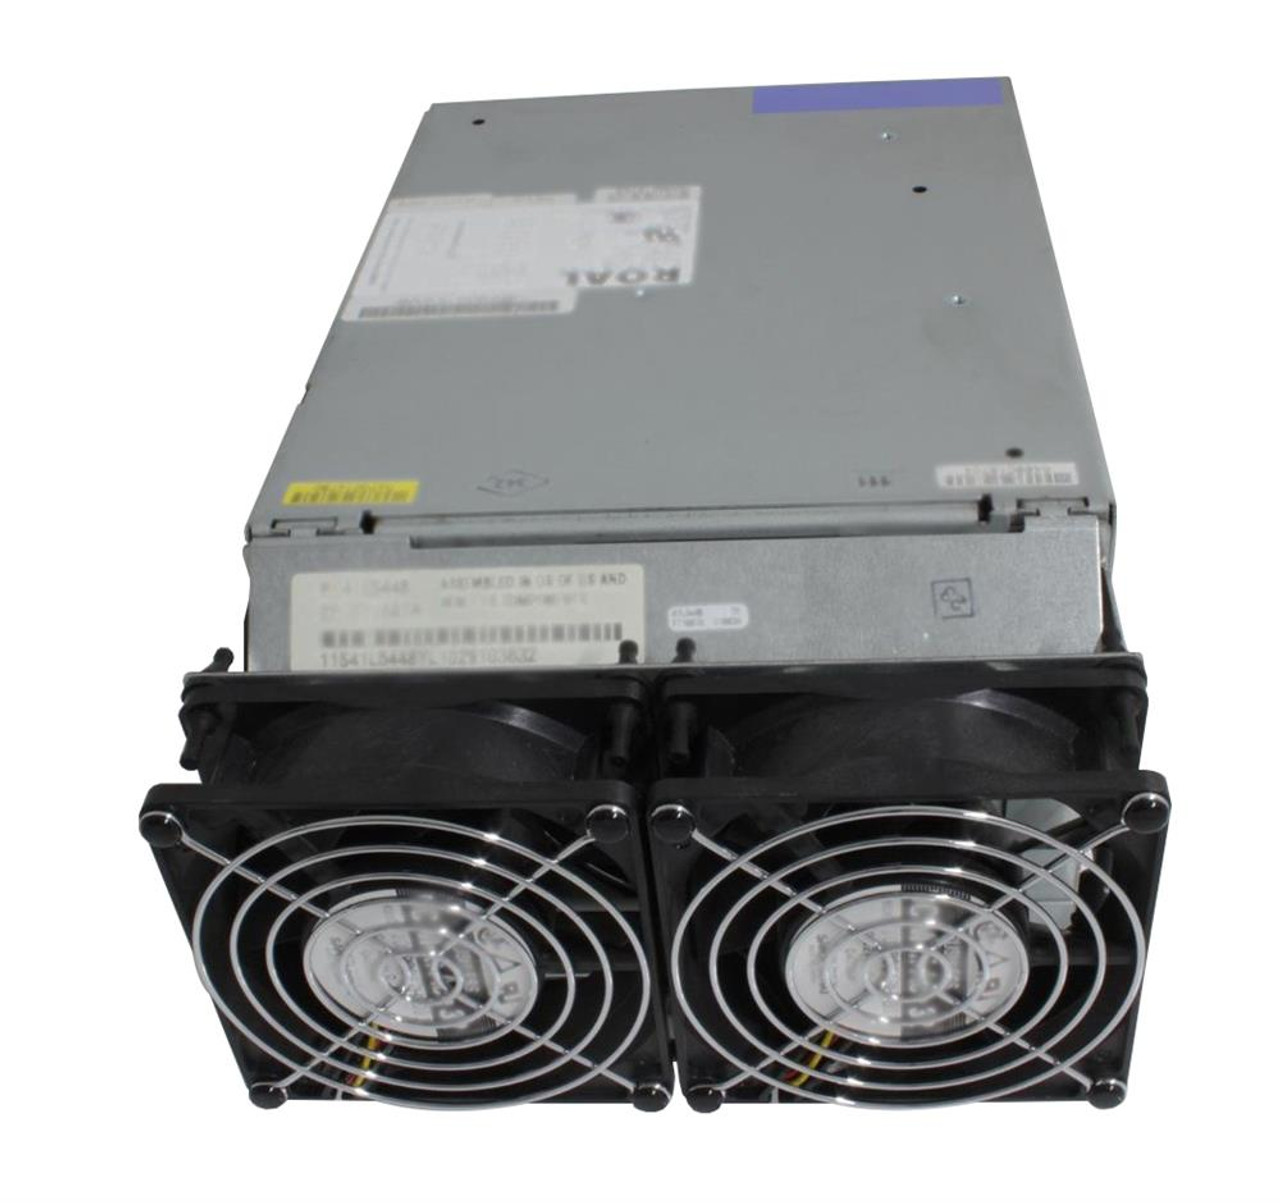 F71687A IBM 595-Watts Power Supply for Rs6000 Server